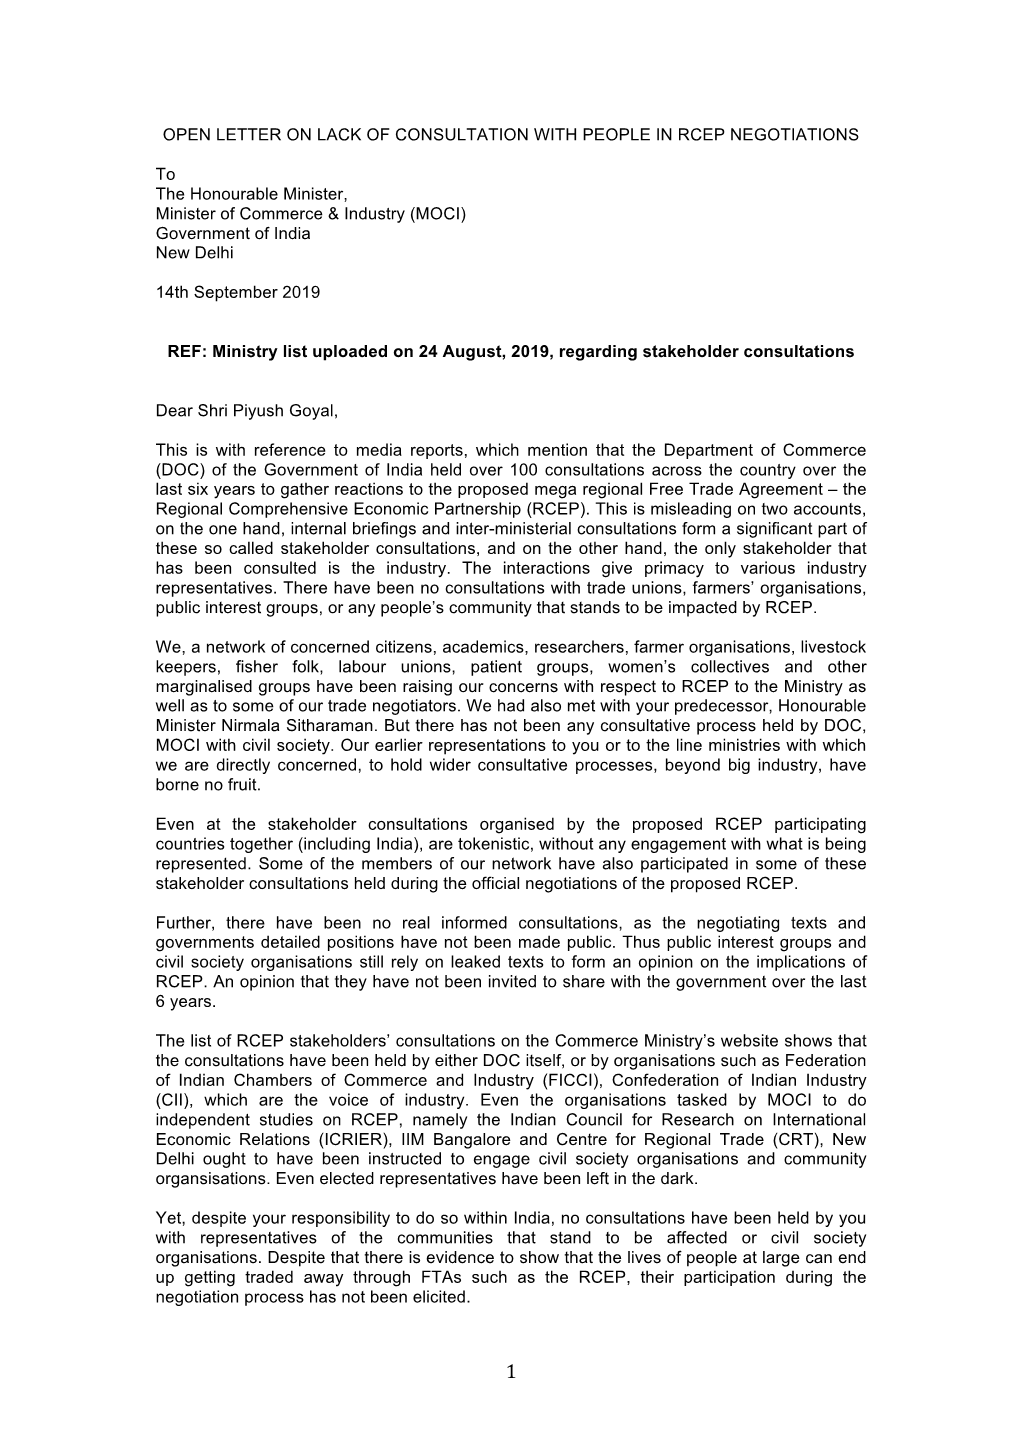 Open Letter on Lack of Consultation with People in Rcep Negotiations